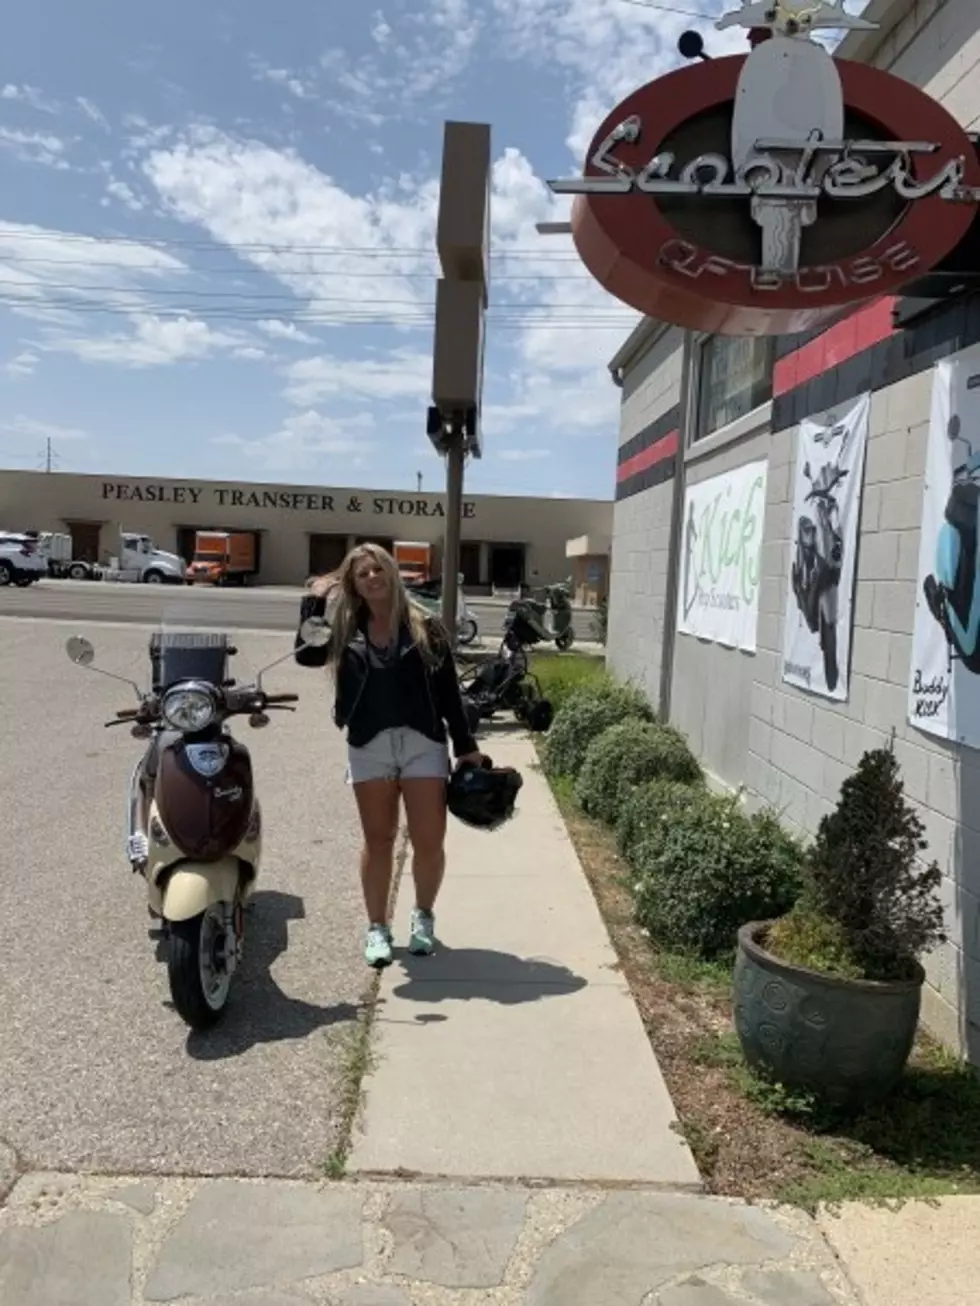 Testing Scoots This Week With Scooters of Boise